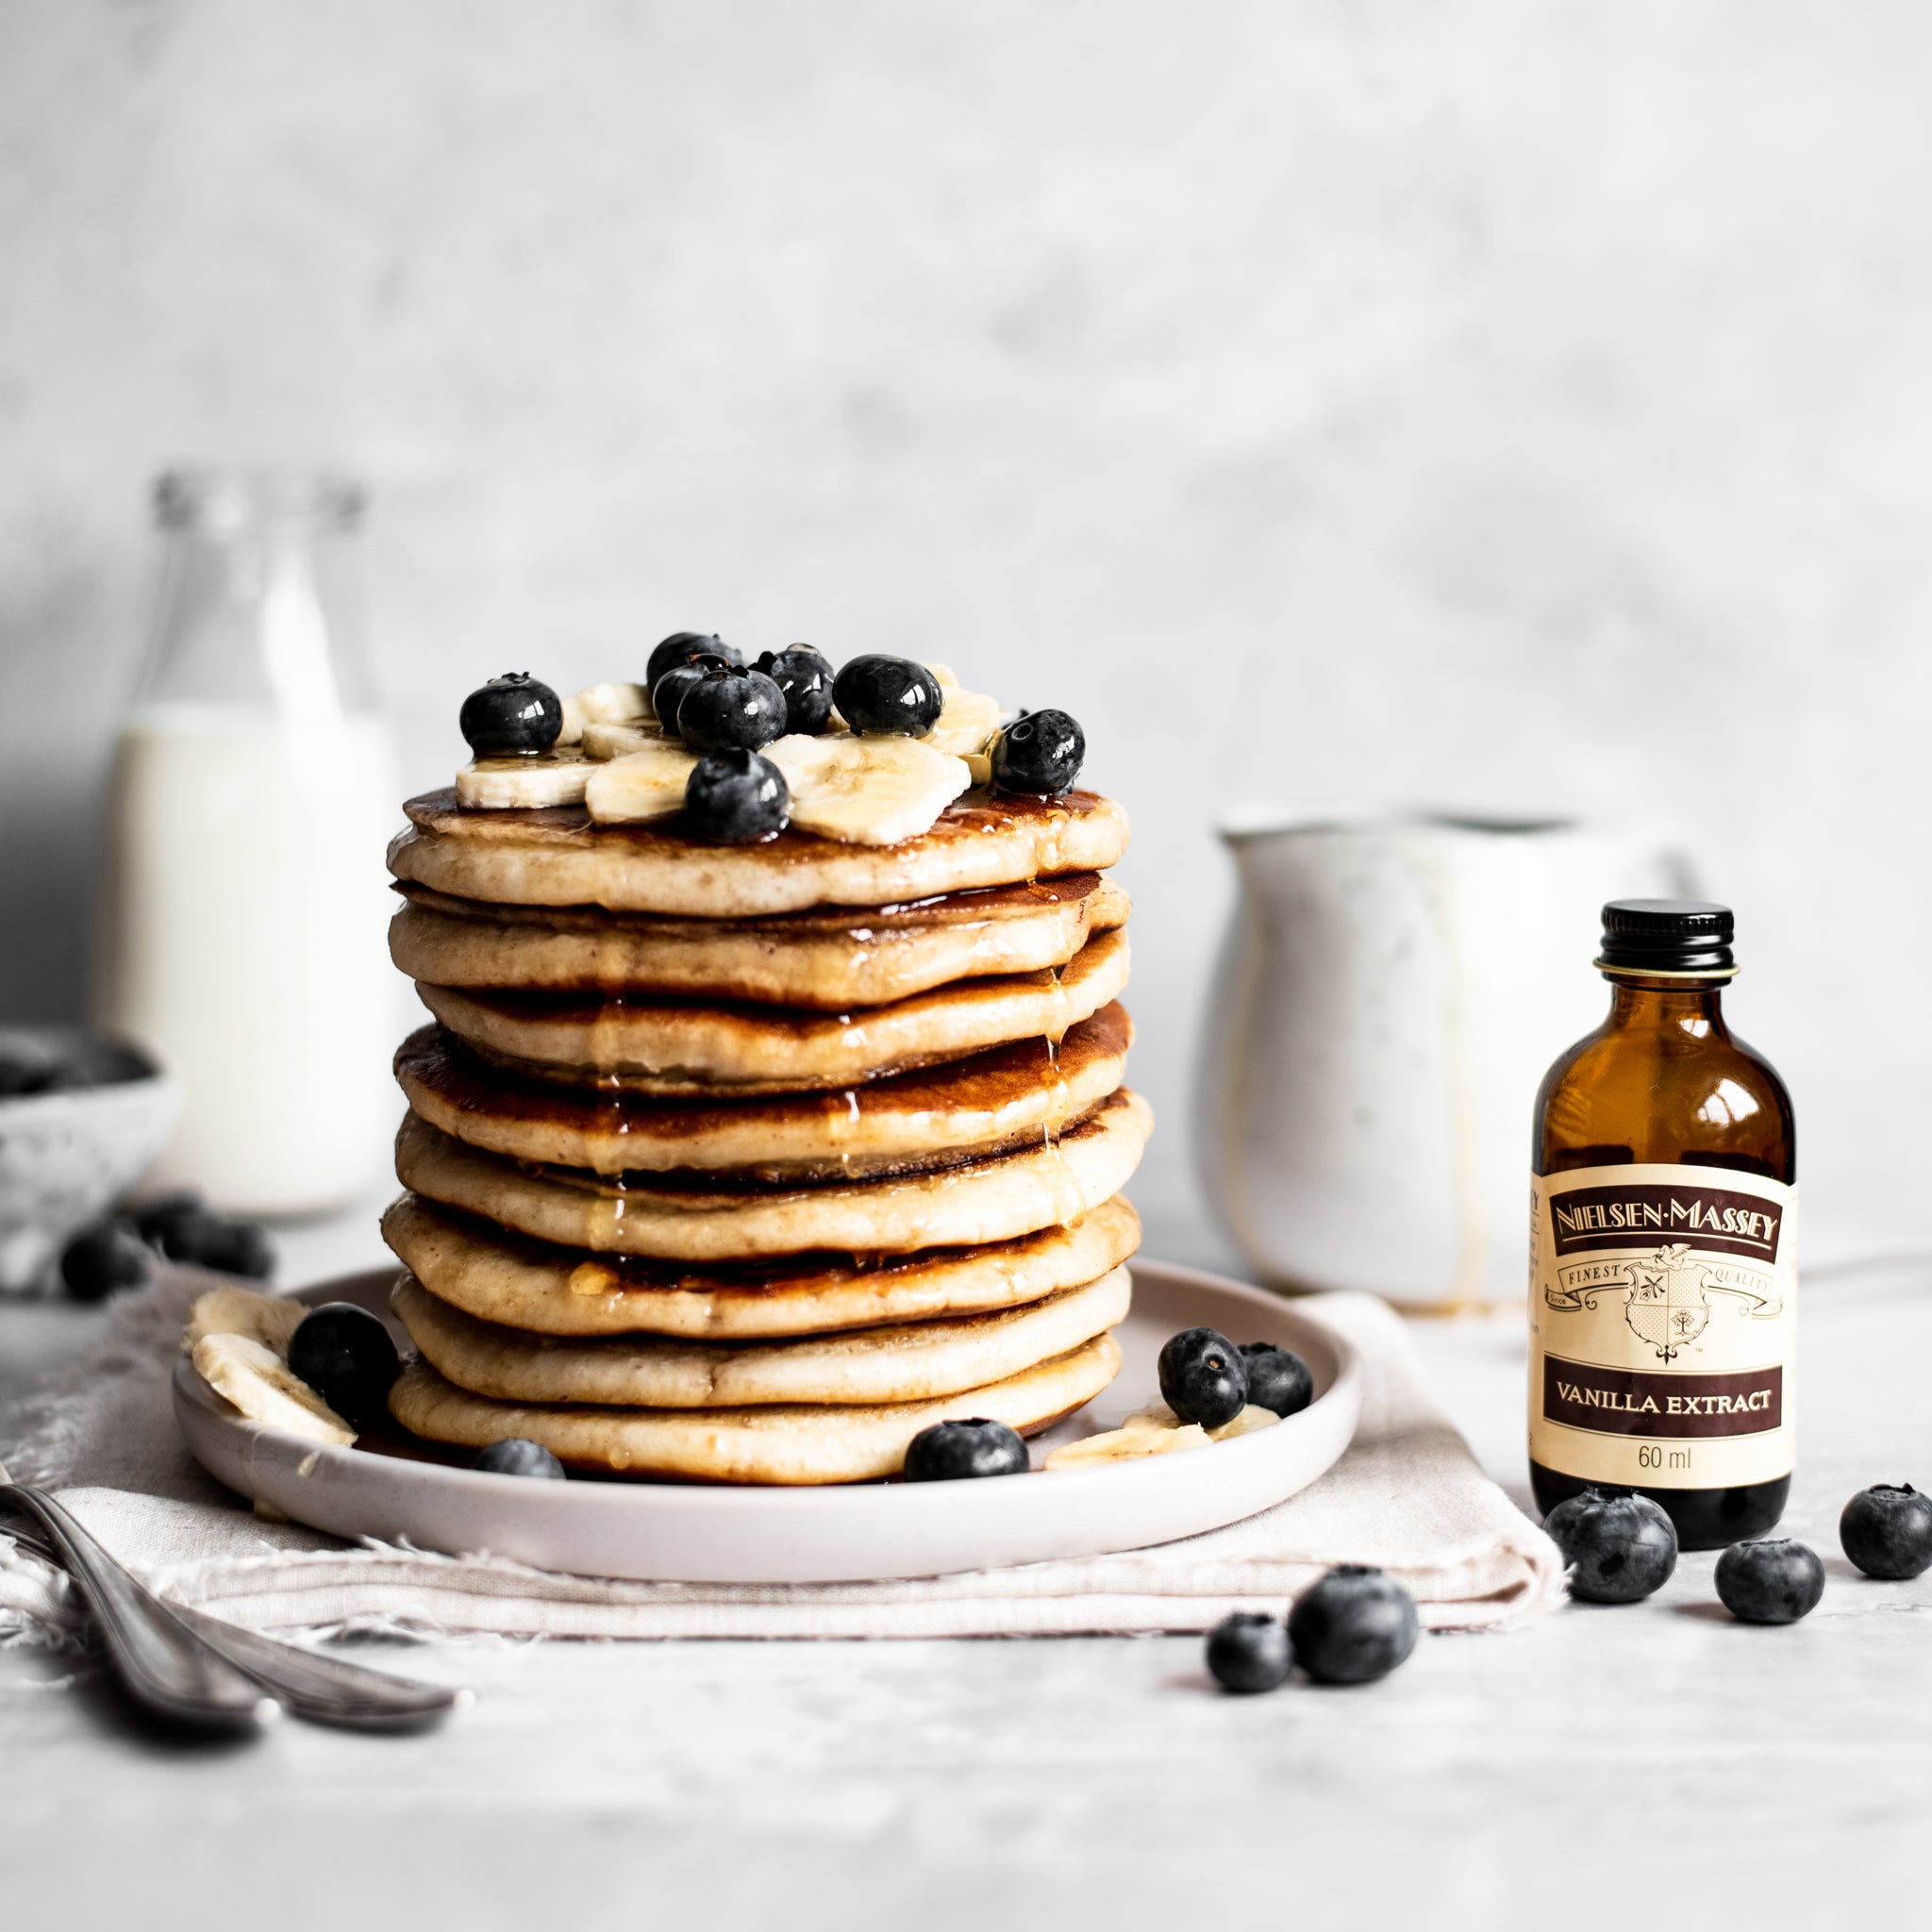 A stack of vegan pancakes with blueberries and sliced banana on top next to a bottle of Nielsen Massey vanilla extract